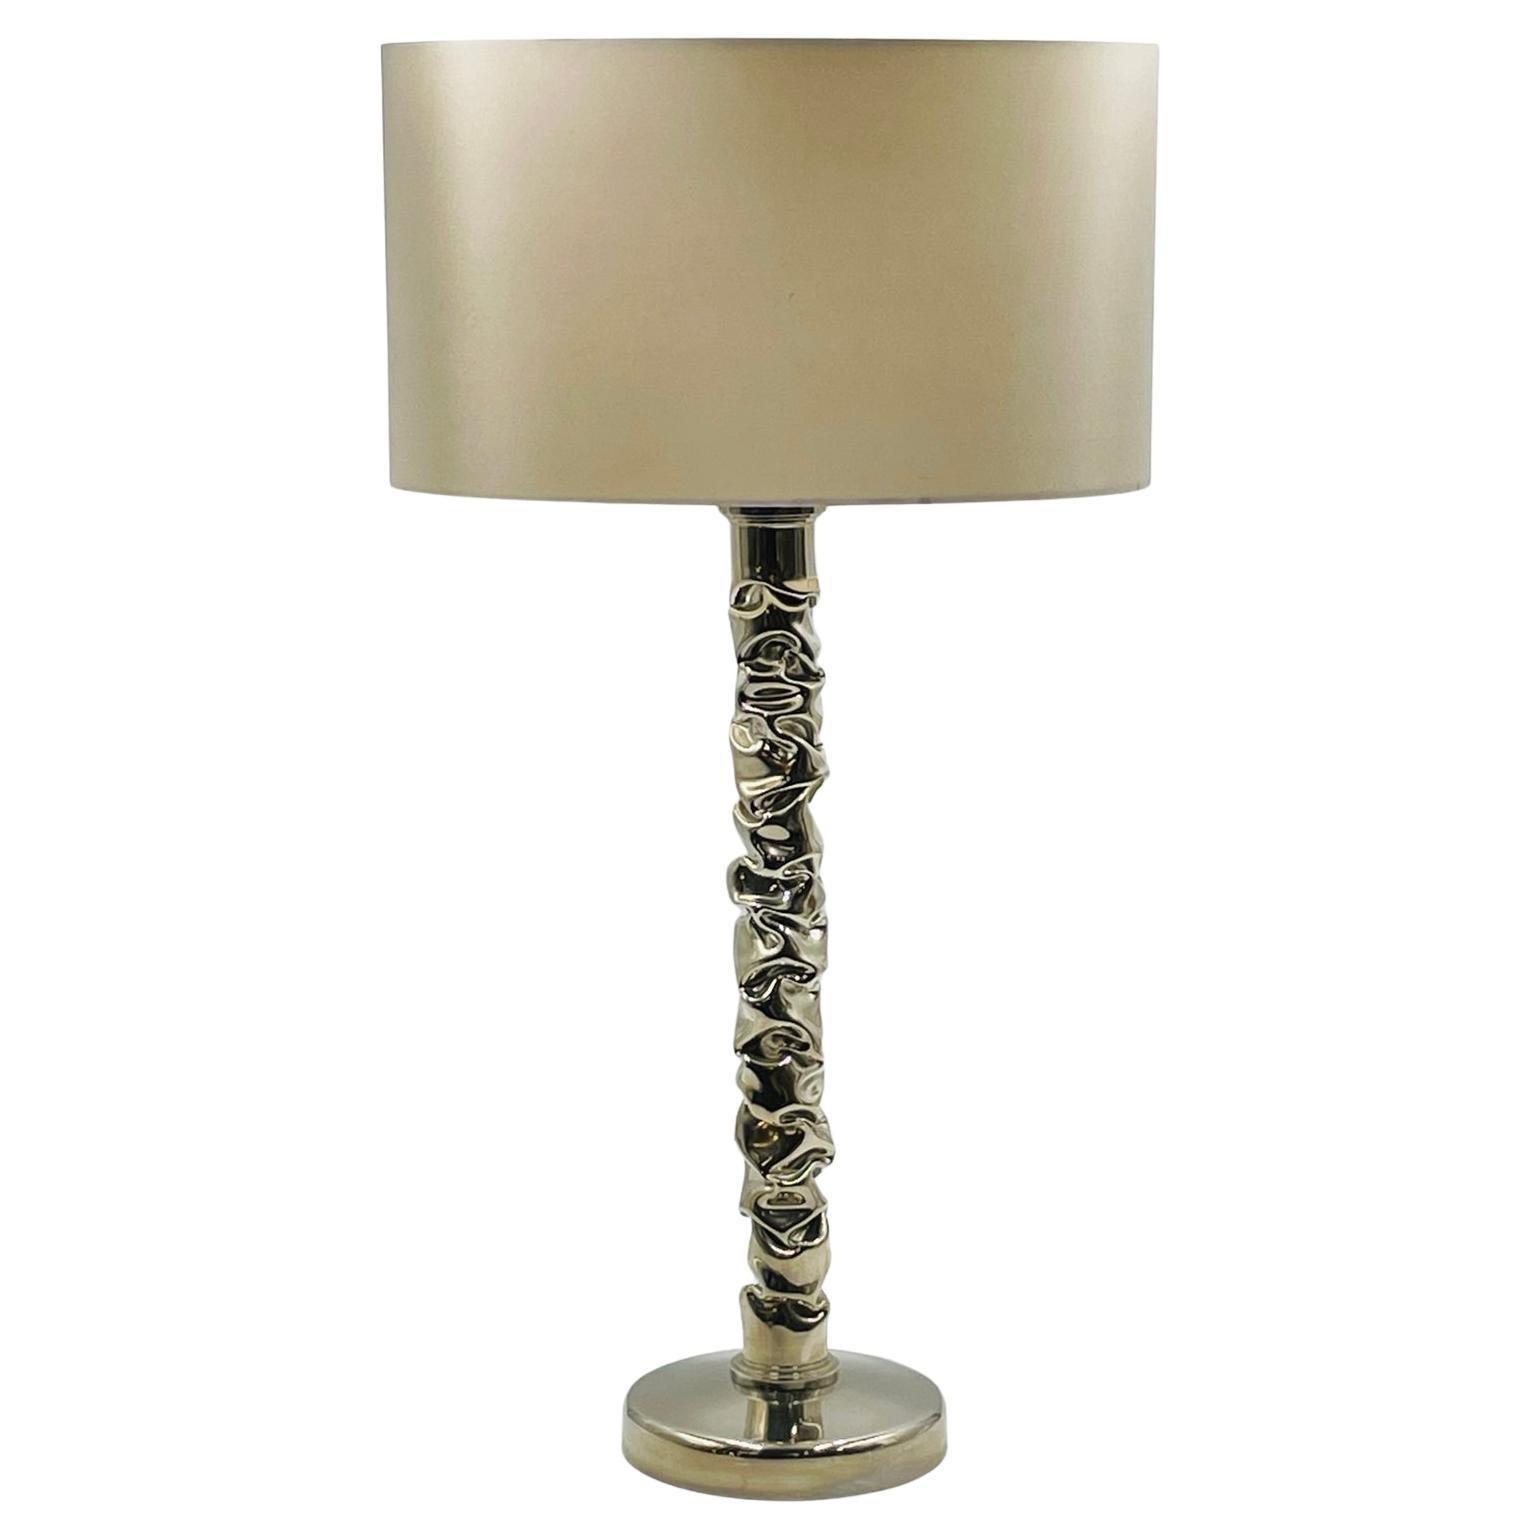 Stunning Table Lamp in Polished Nickel, Made in England by Porta Romana